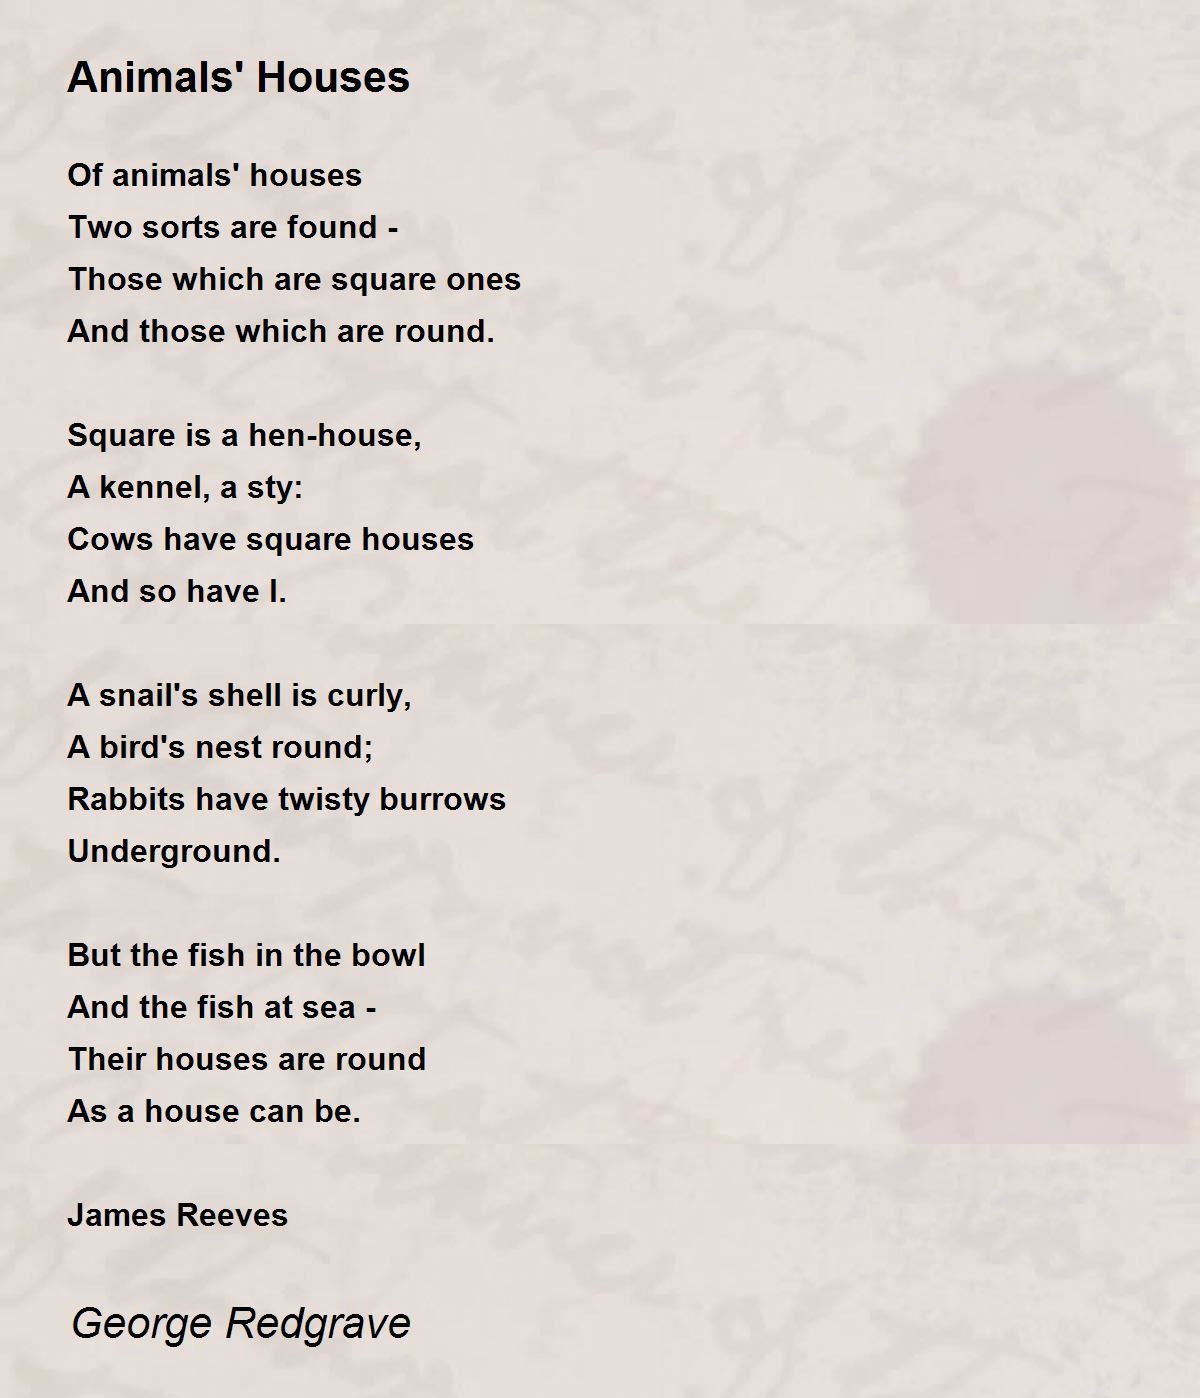 Animals' Houses - Animals' Houses Poem by George Redgrave